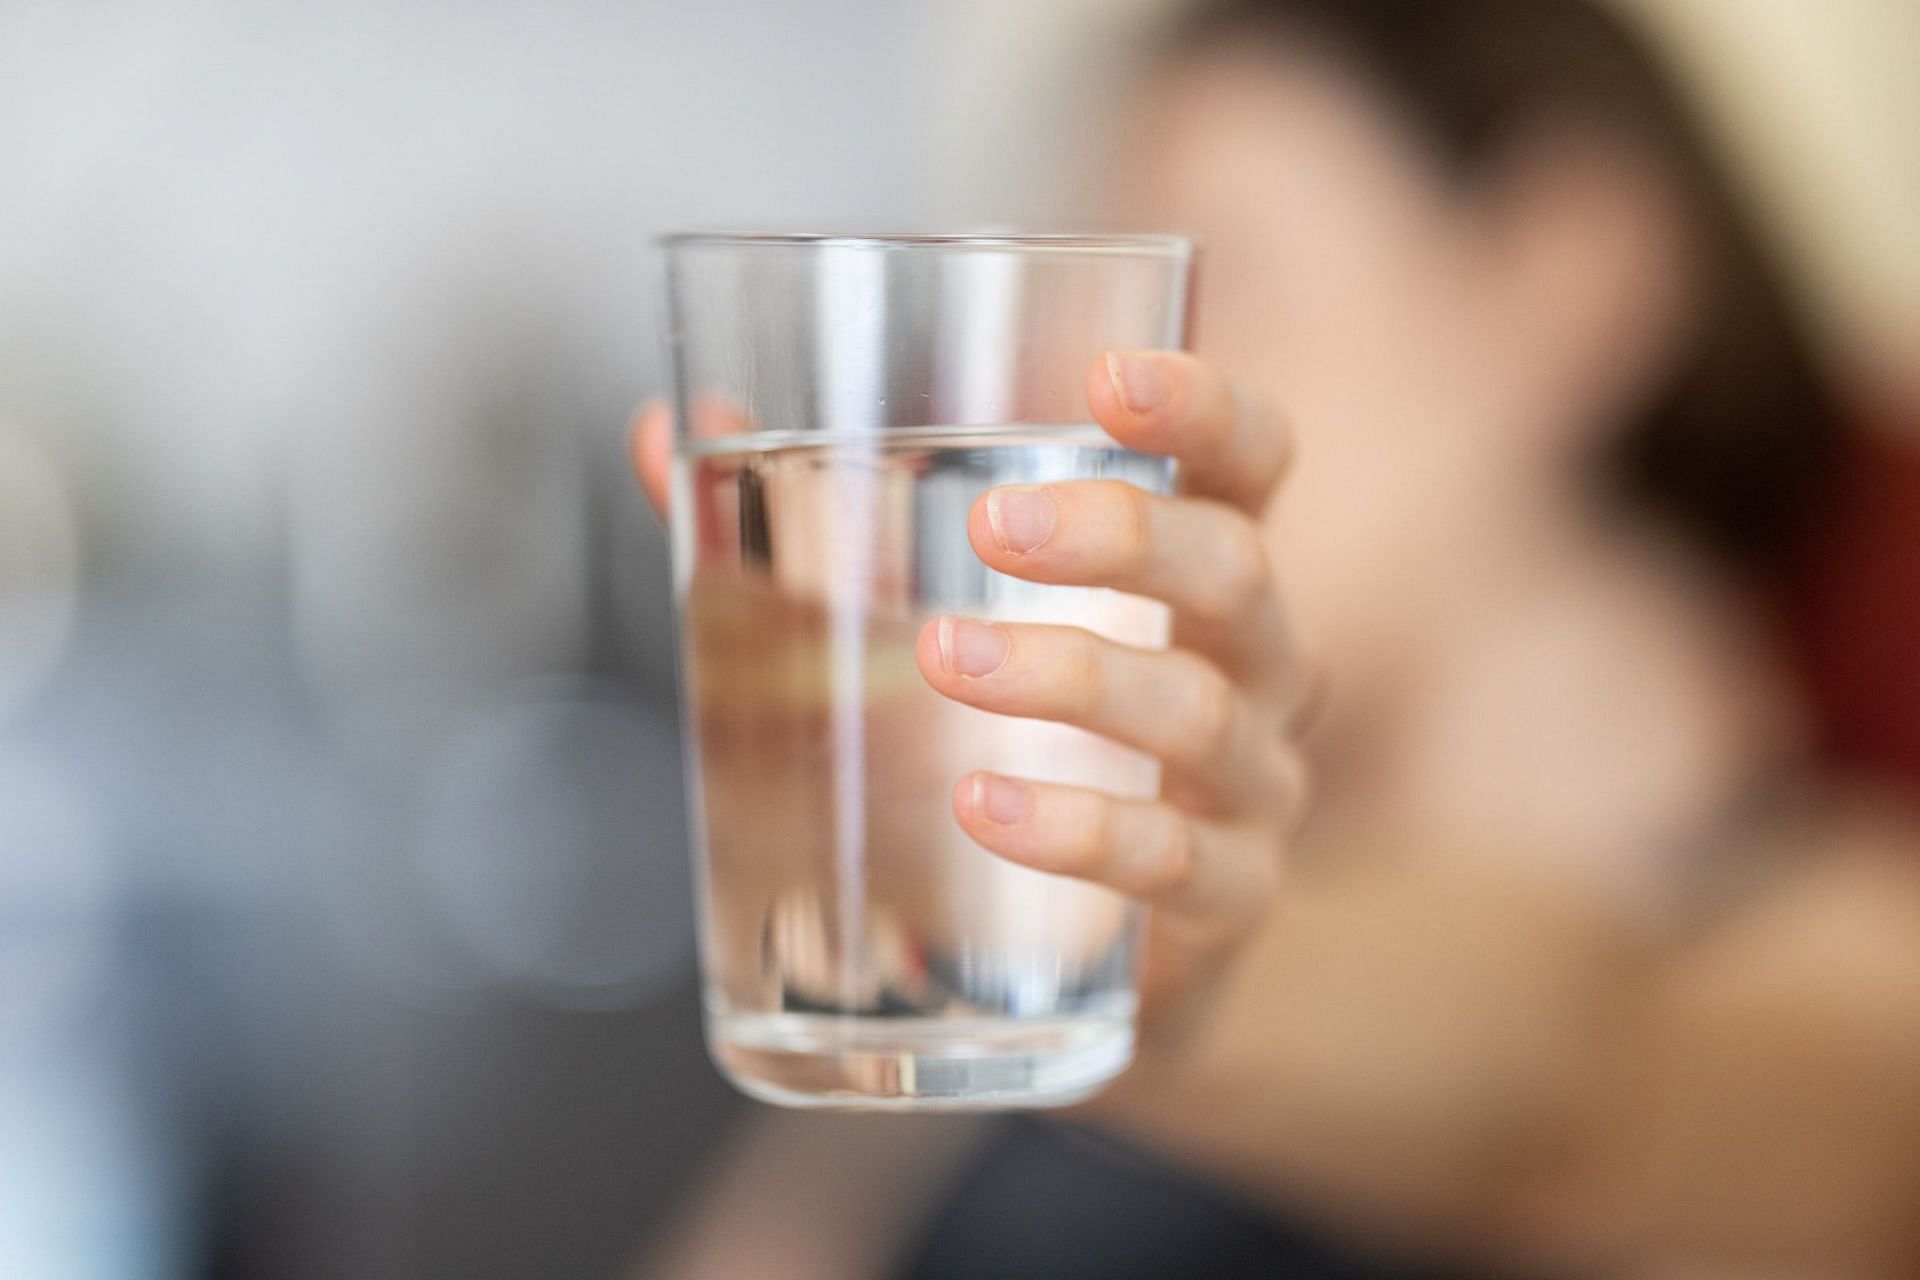 Water can help you stay hydrated (Image via Unsplash/Engin Akyurt)